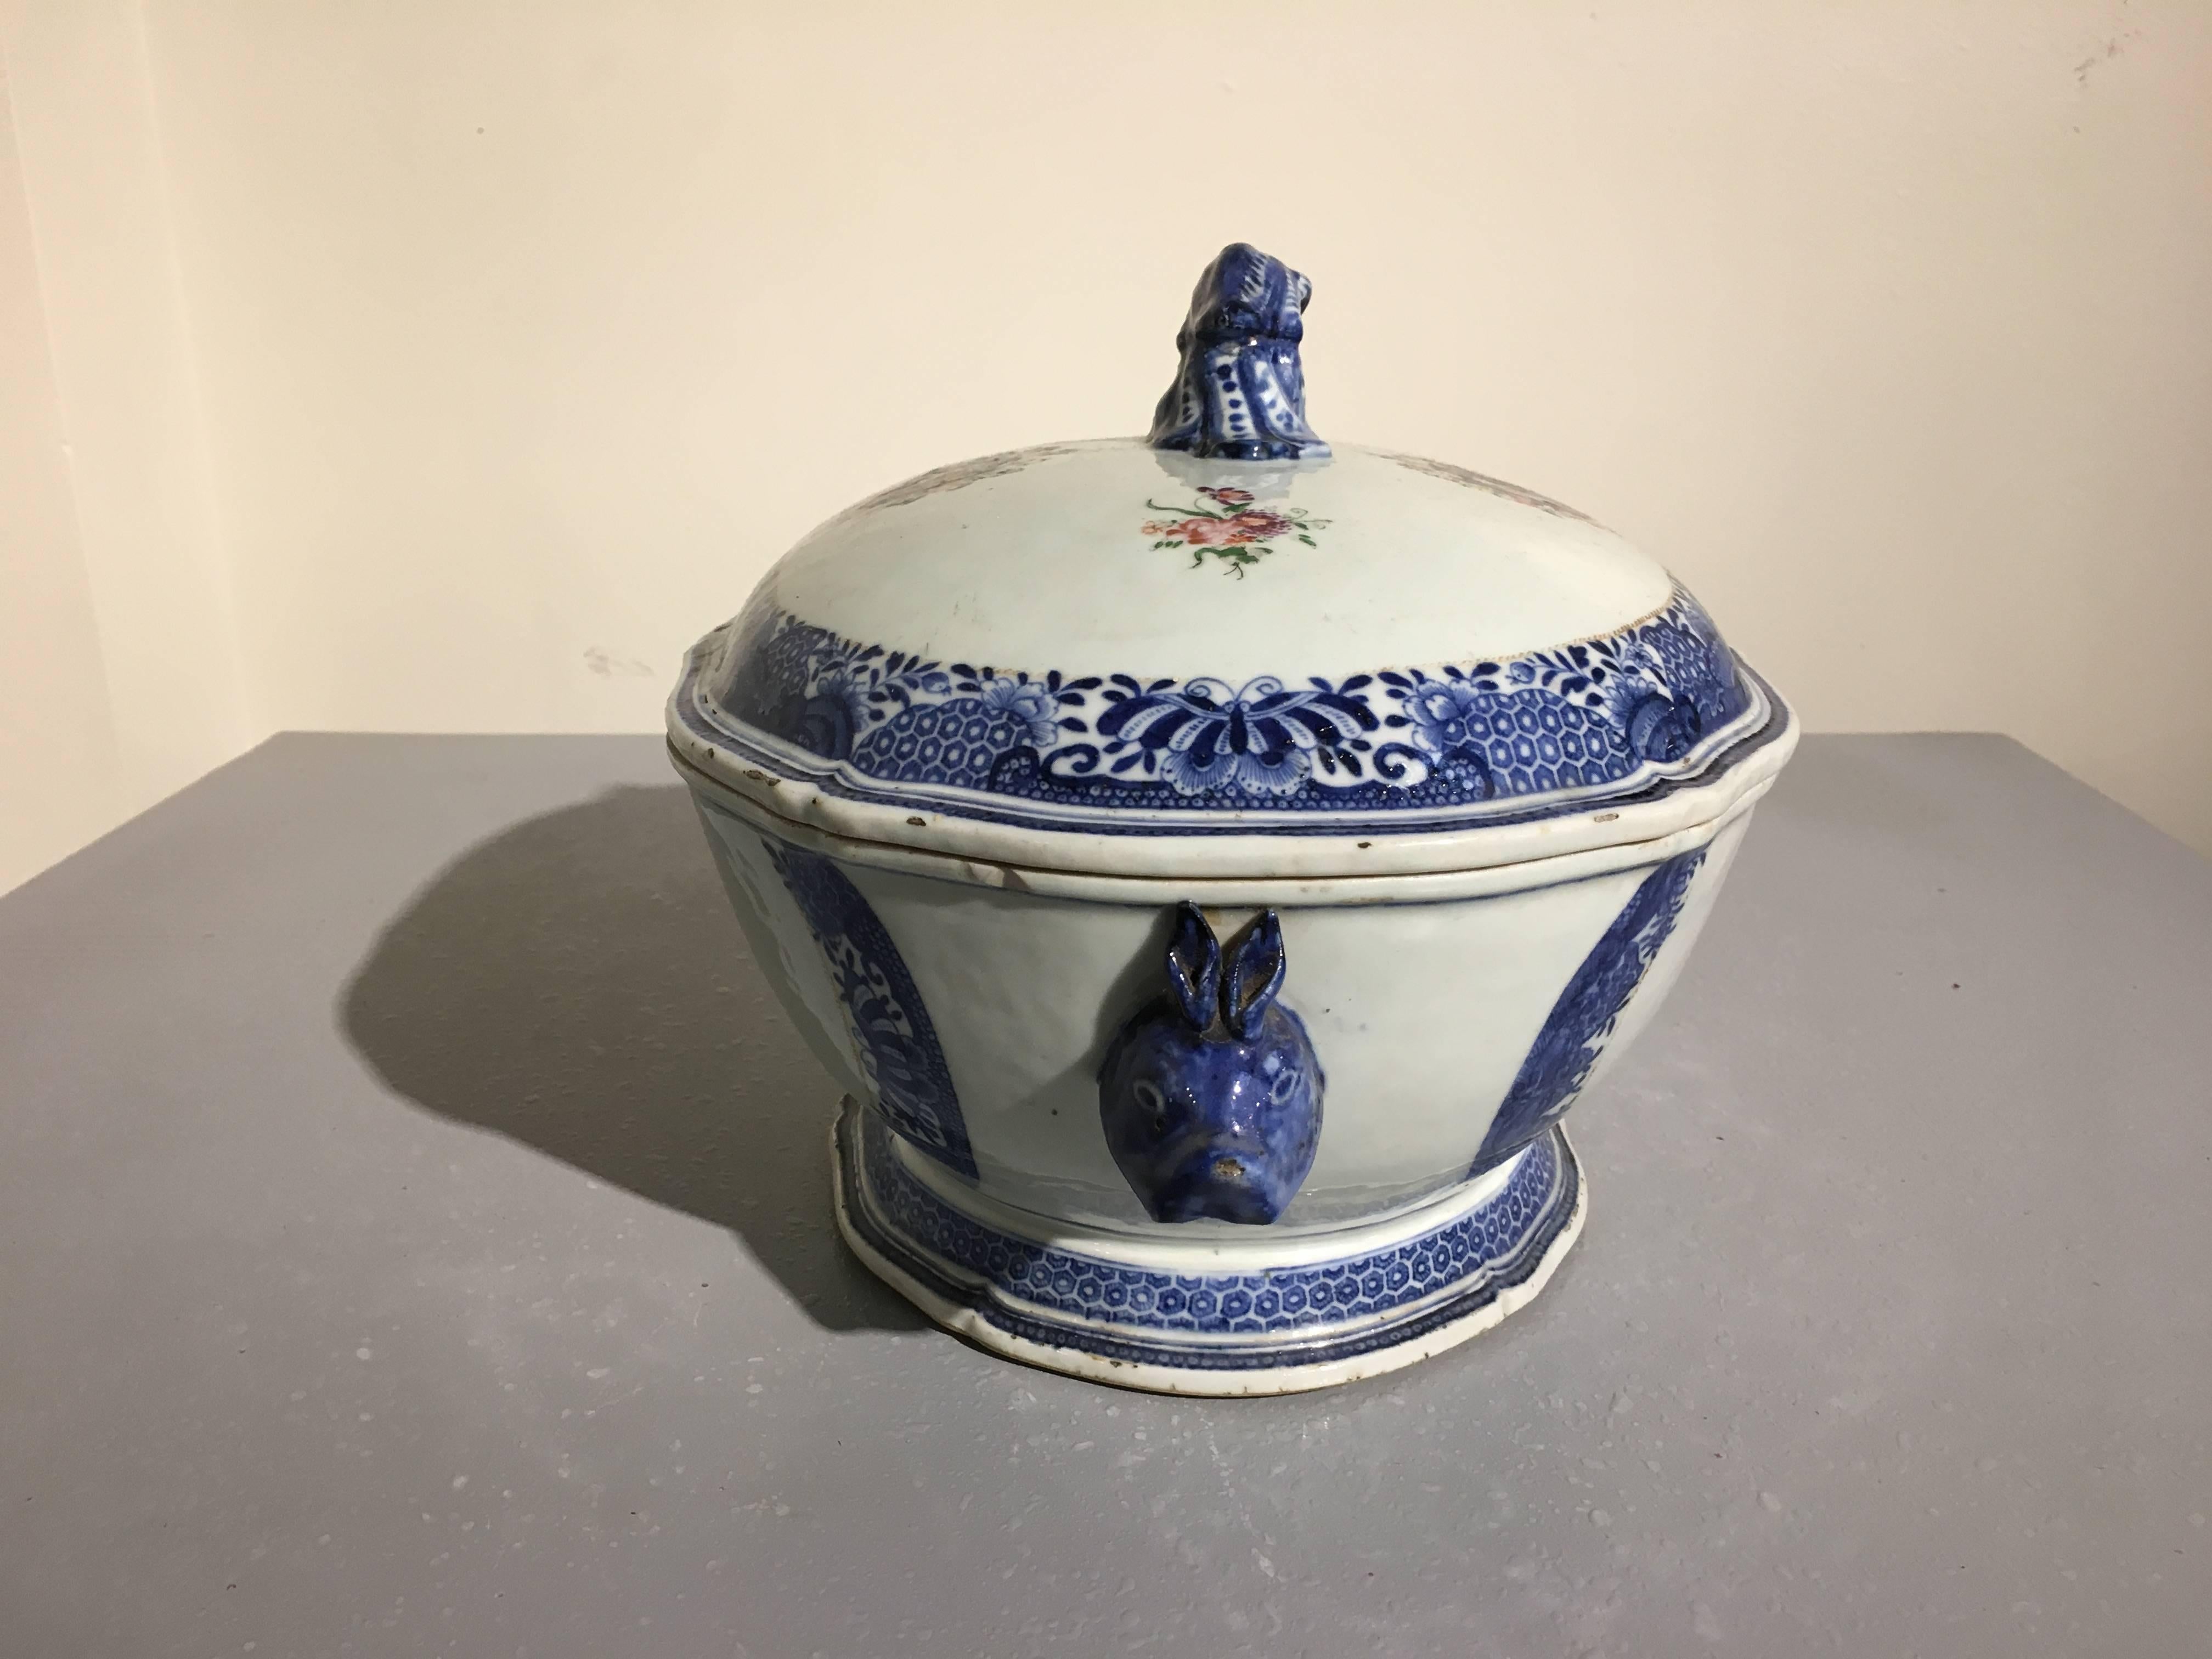 Enameled 18th Century Chinese Export Porcelain Armorial Tureen